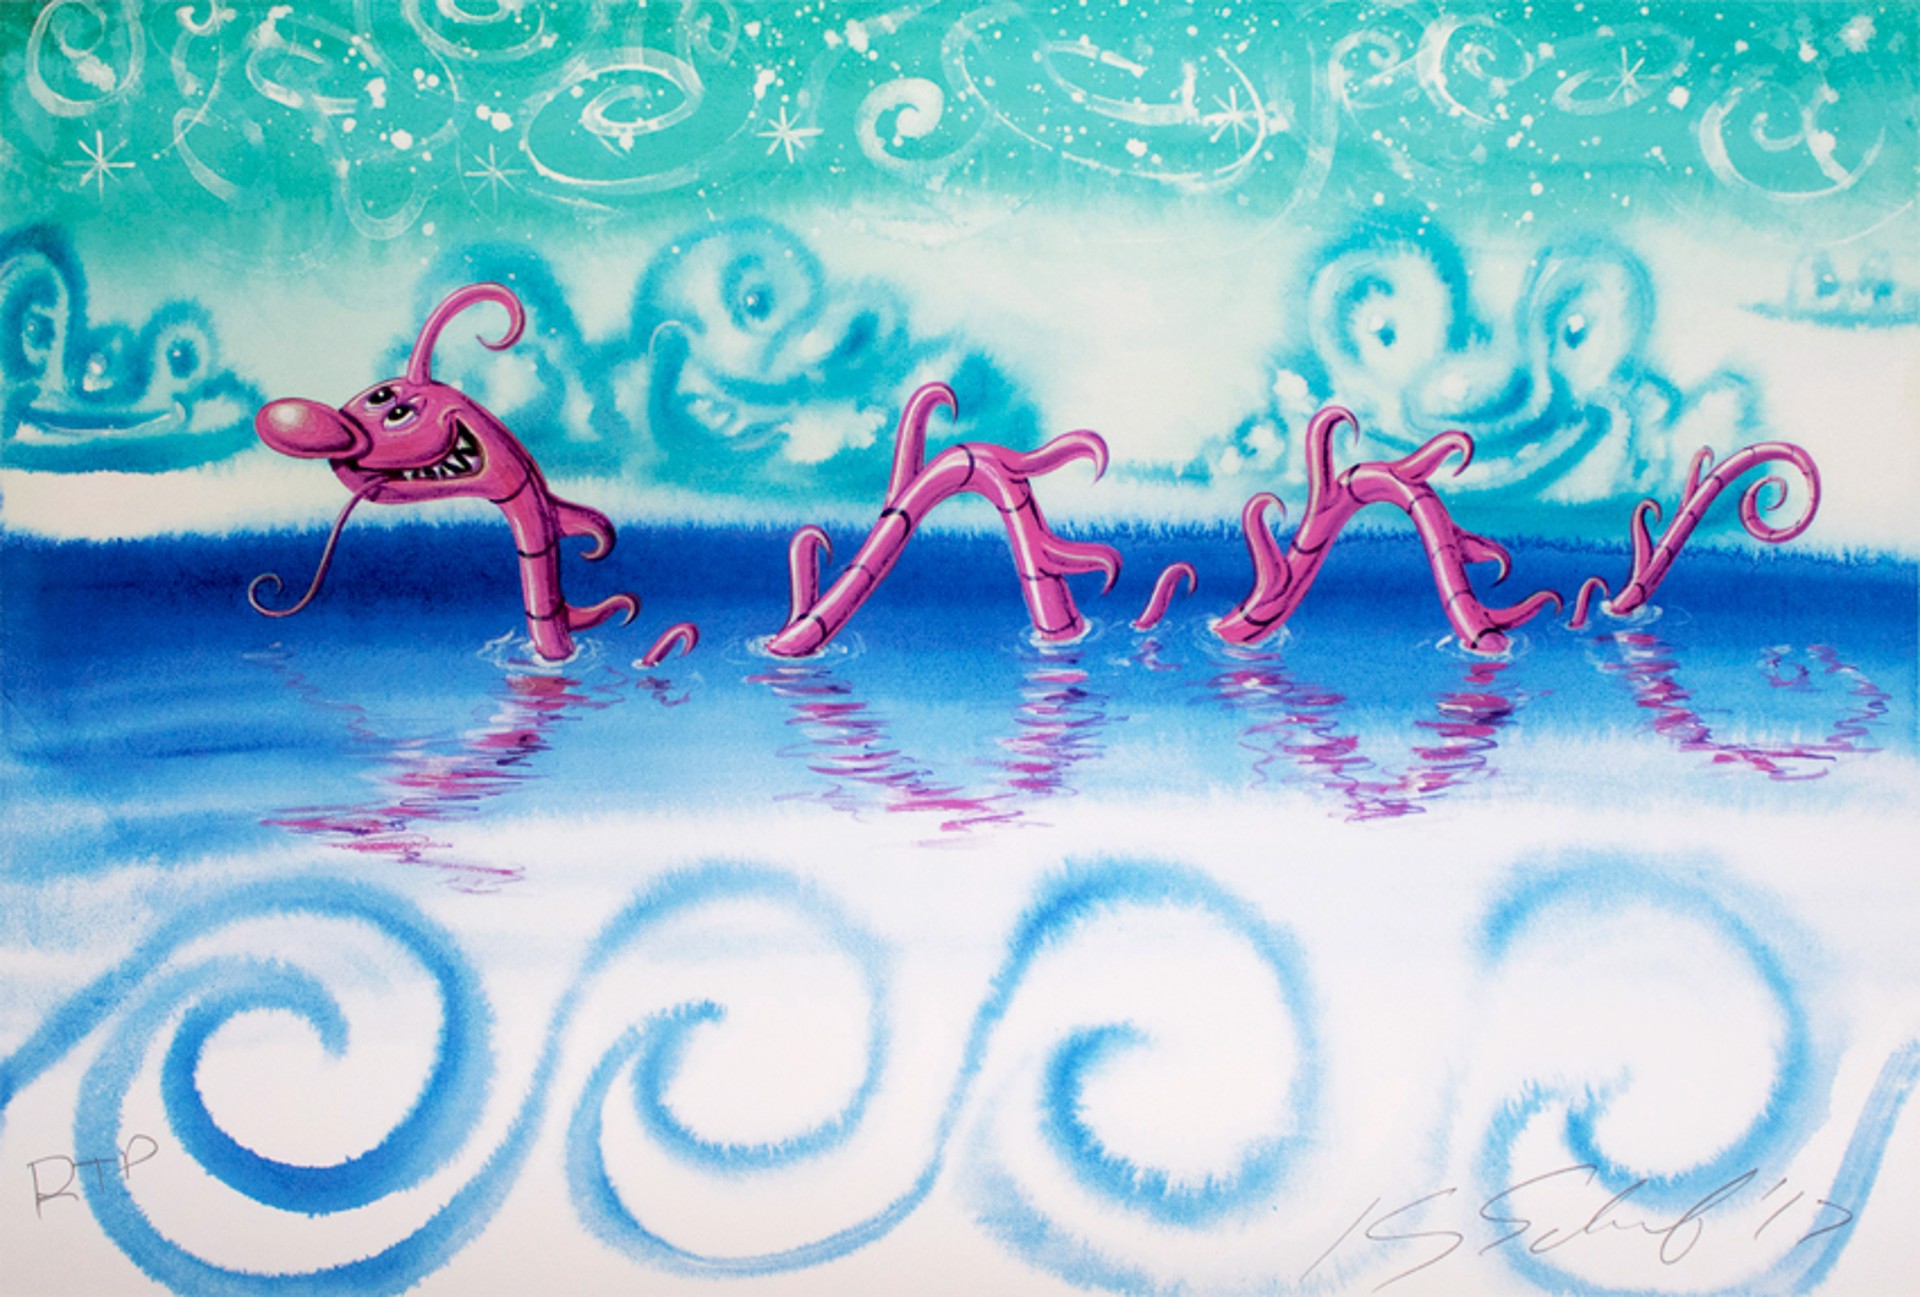 Seeserpent by Kenny Scharf